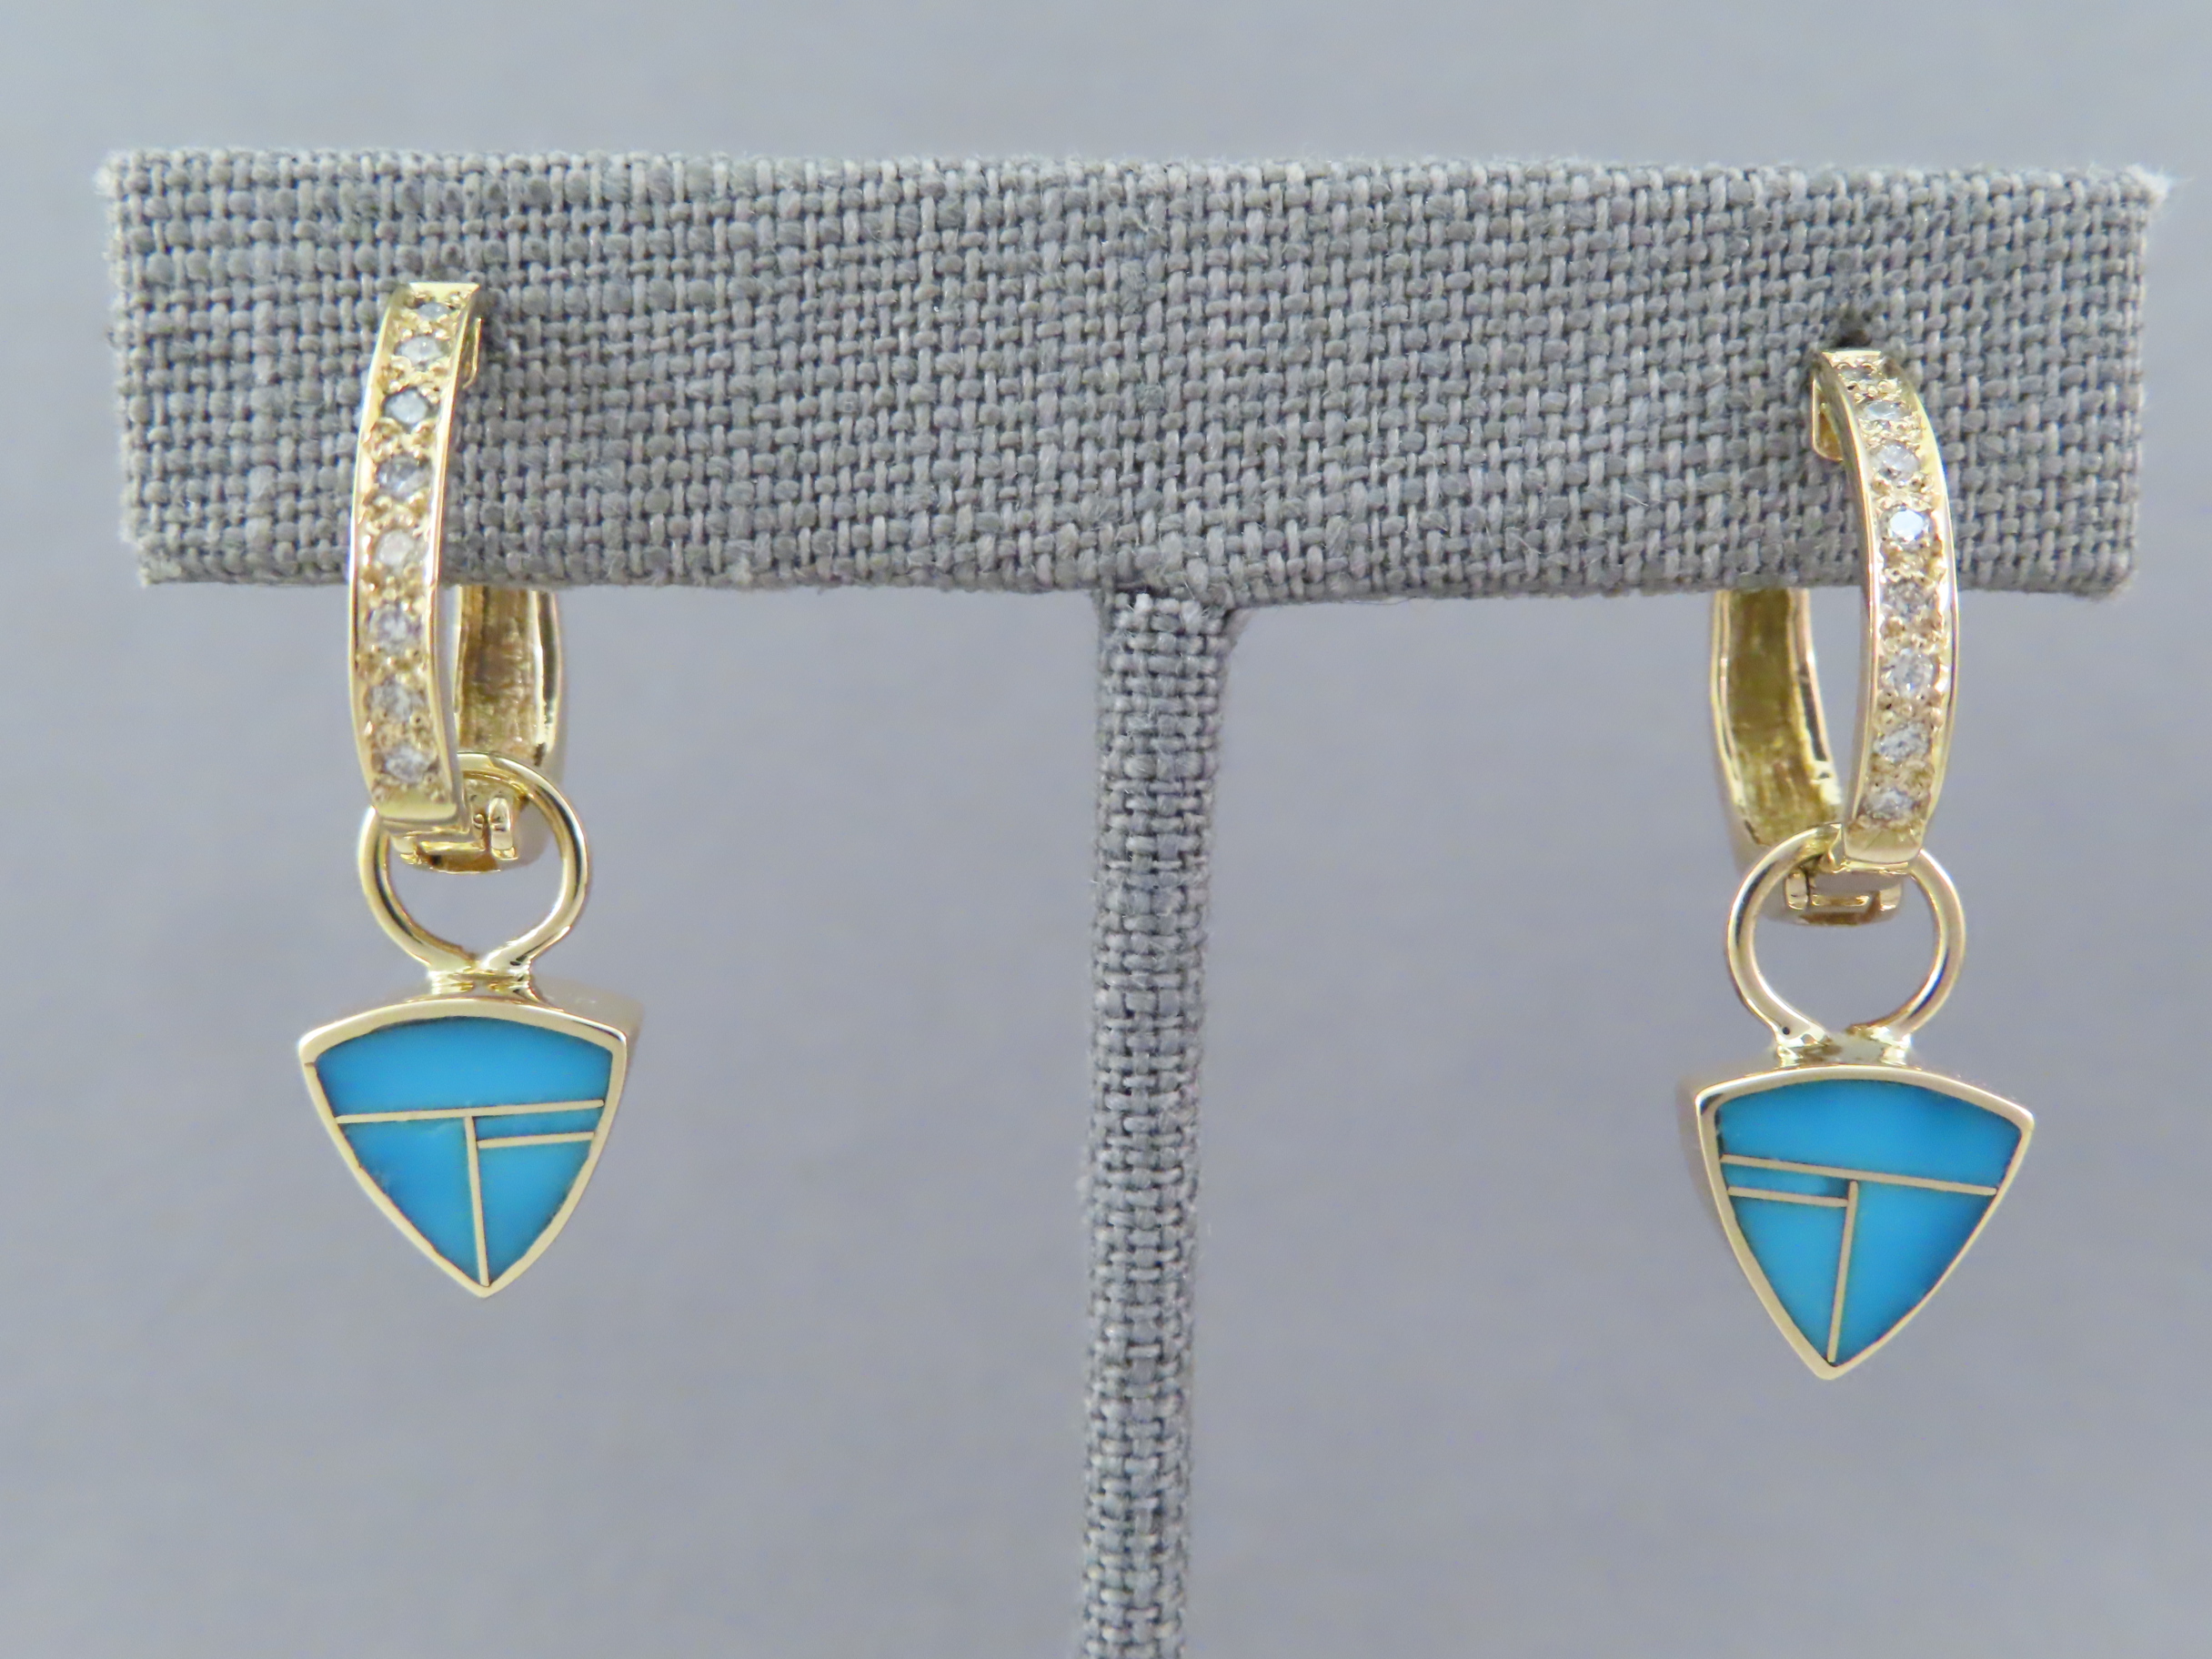 Native American Jewelry - 2-Tier Turquoise & Diamond Earrings by Navajo jeweler, Peterson Chee $1,795- FOR SALE